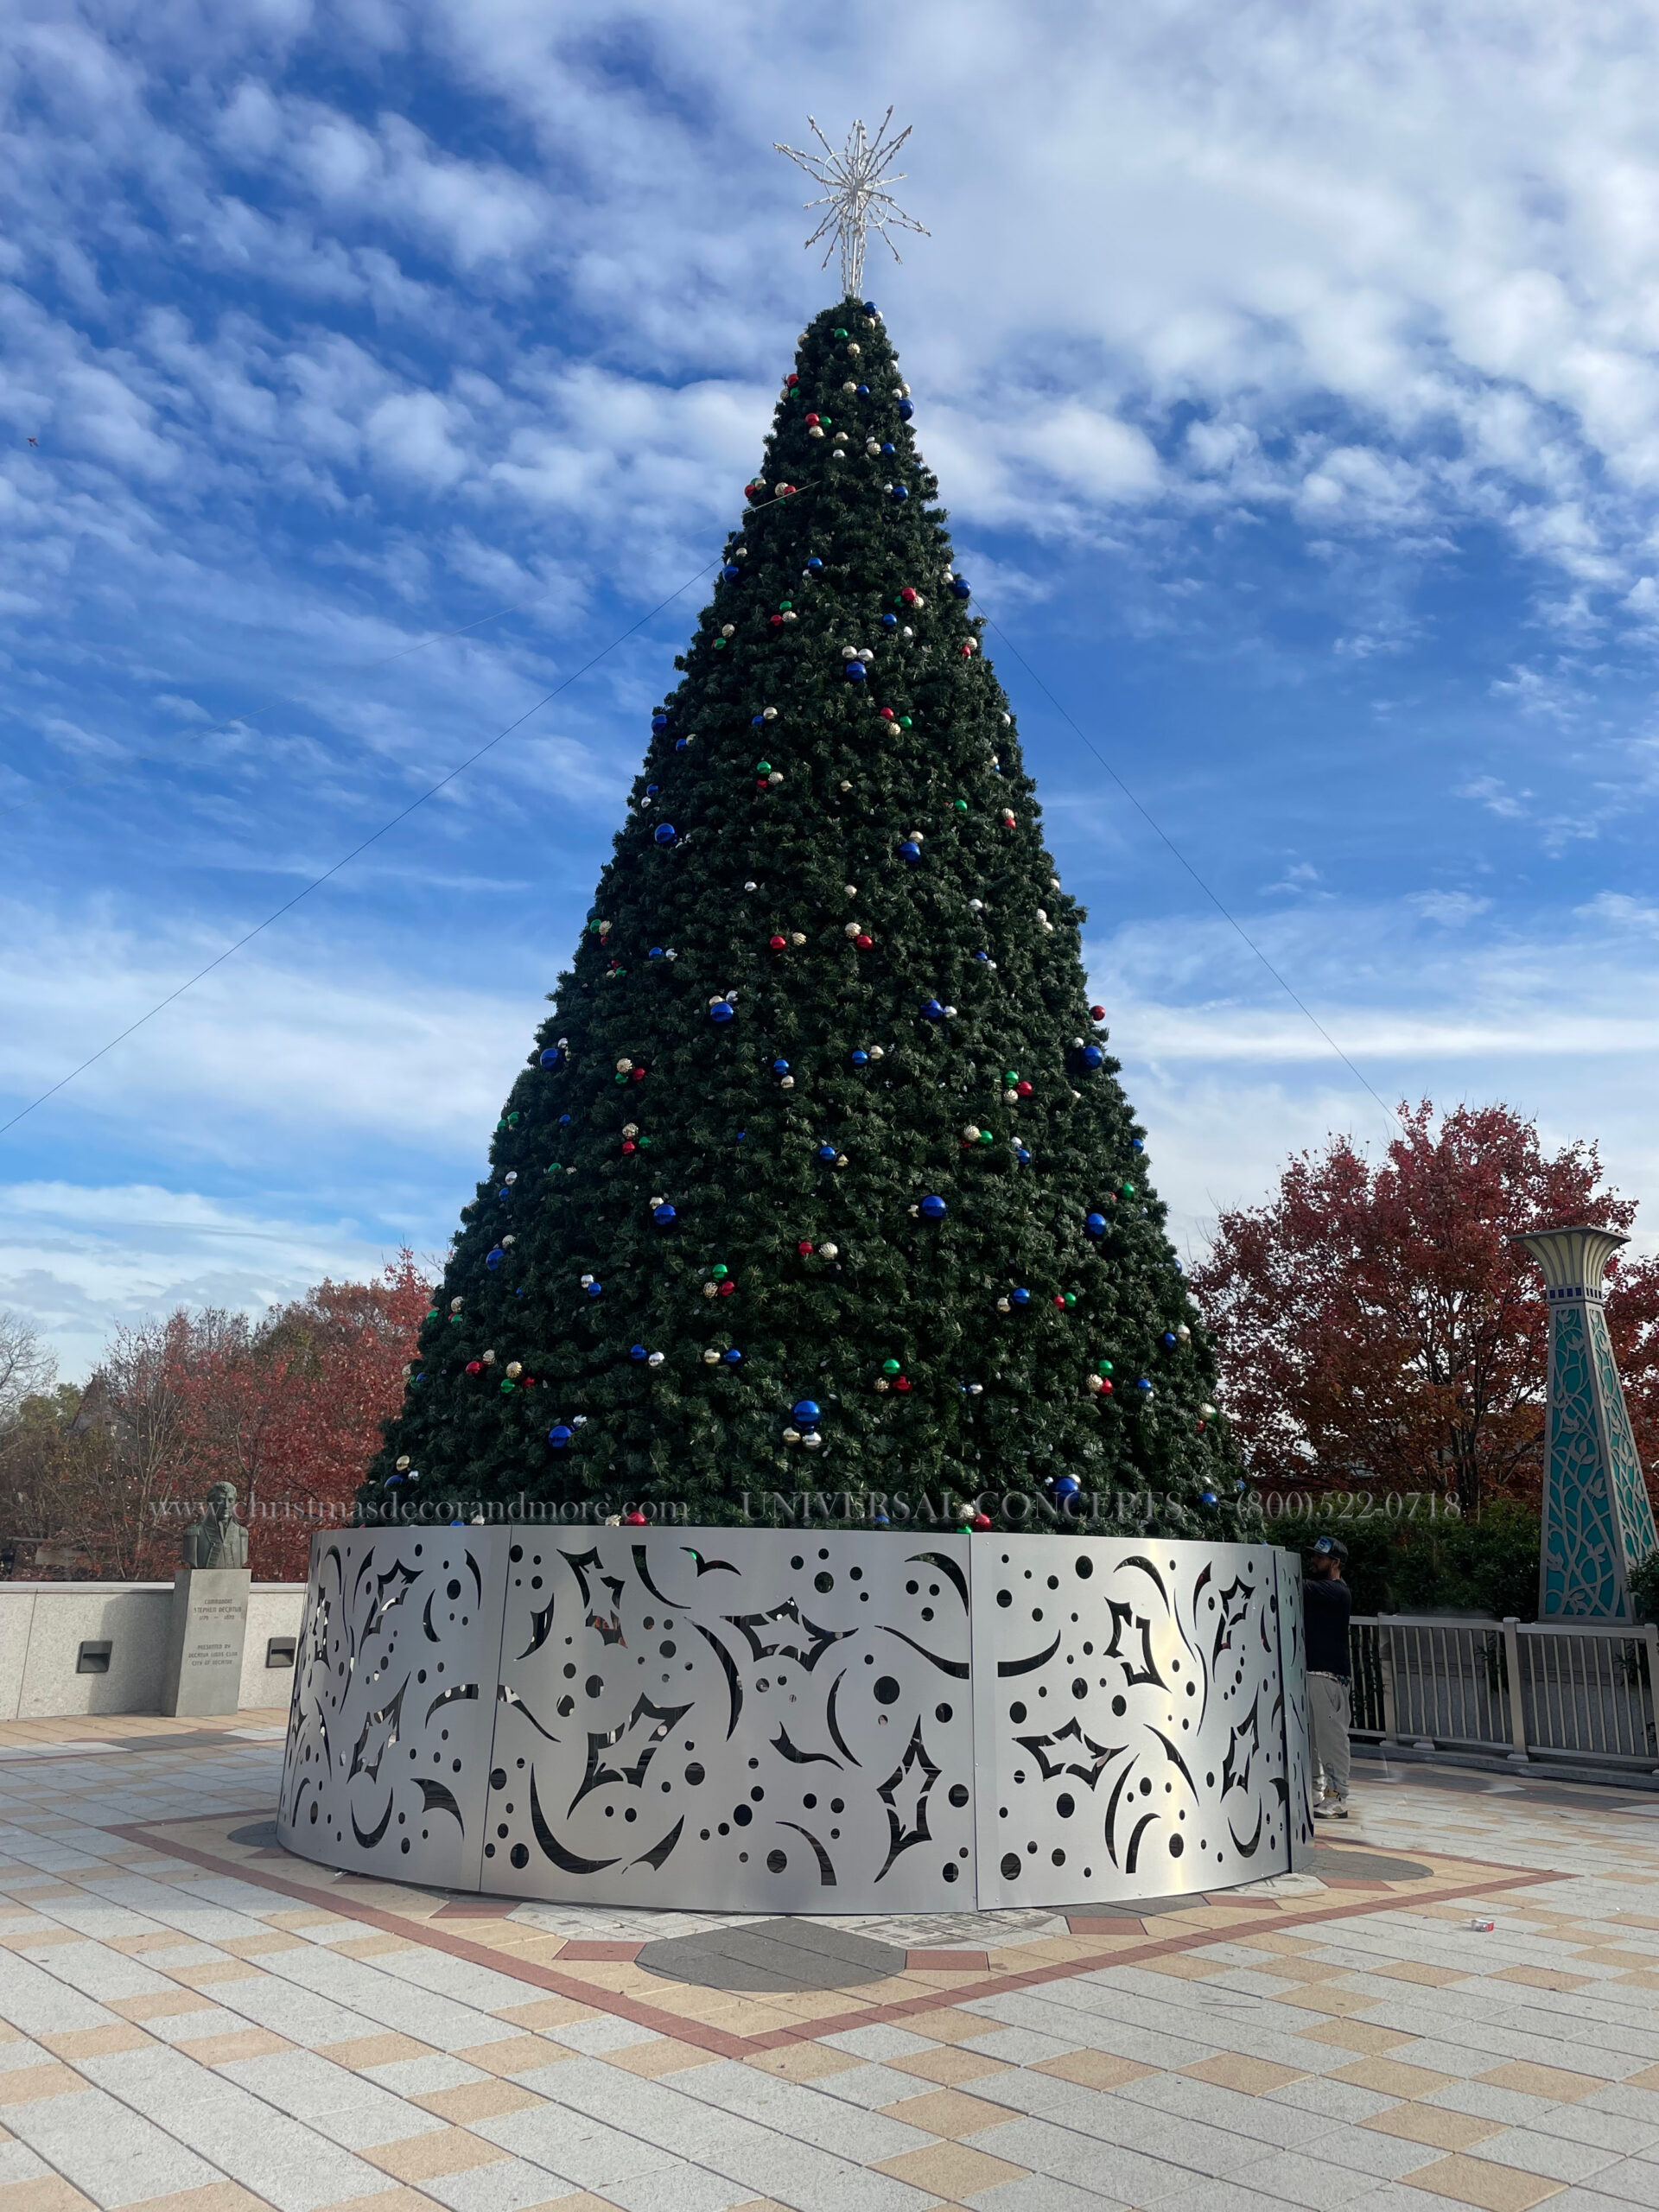 a view of a luminary christmas tree in decatur georgia.